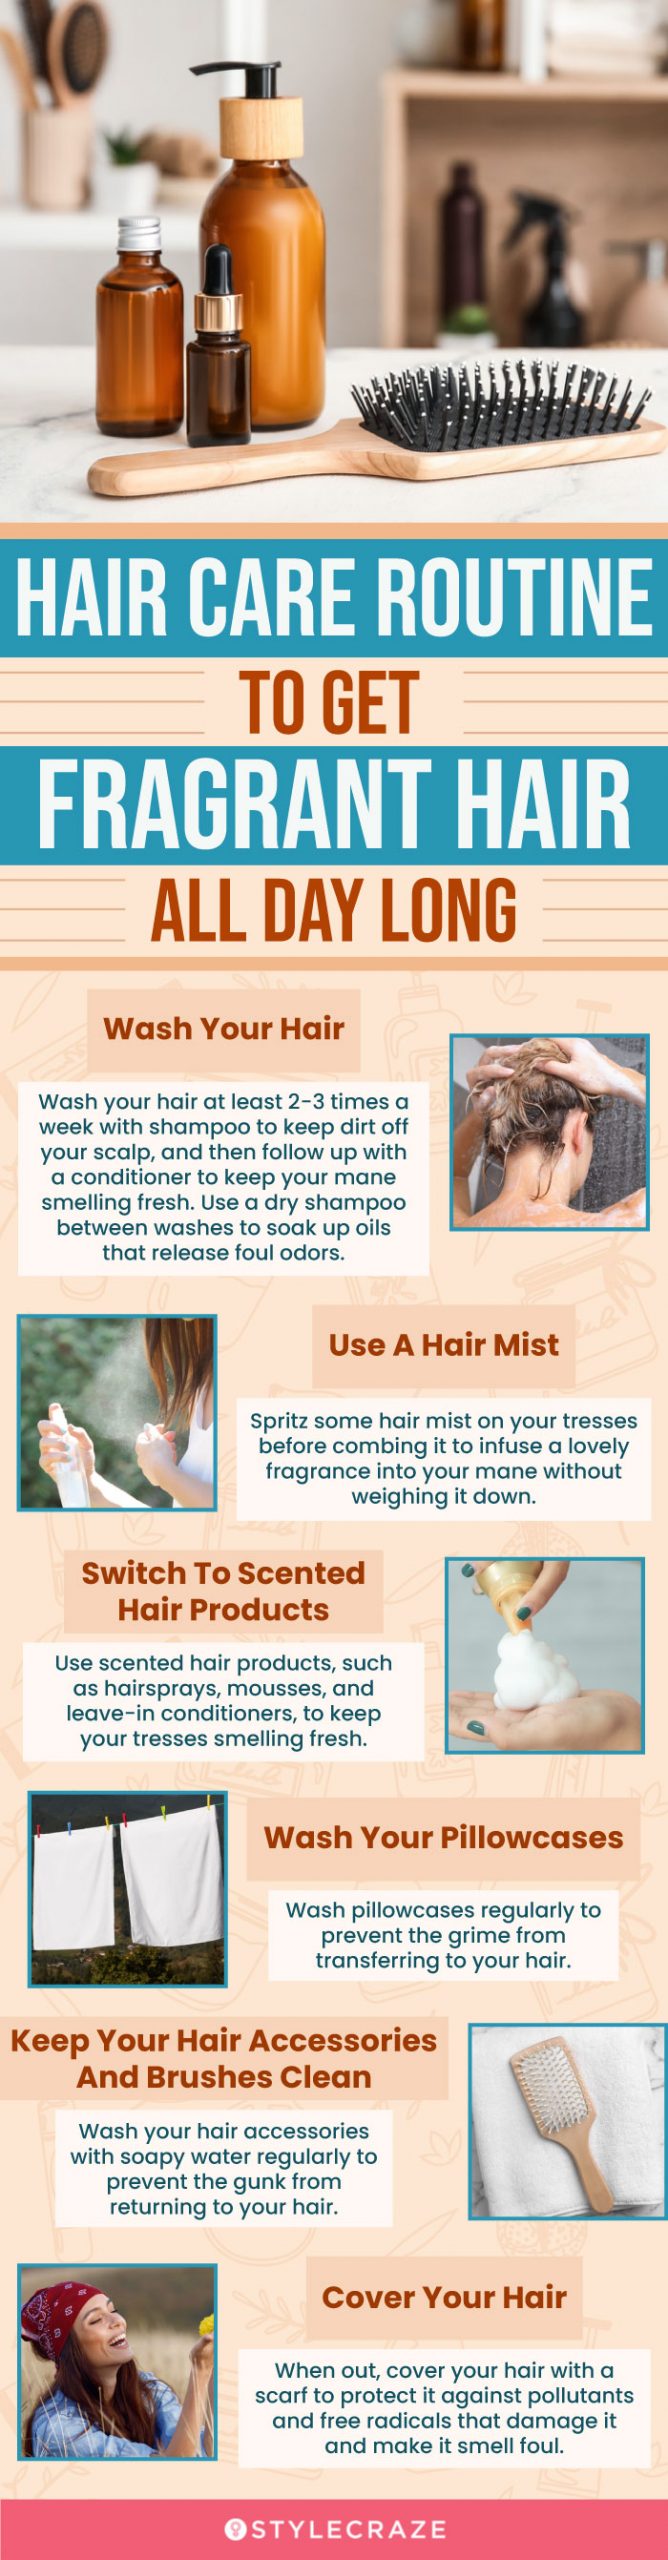 Haircare Routine To Get Fragrant Hair All Day Long (infographic)